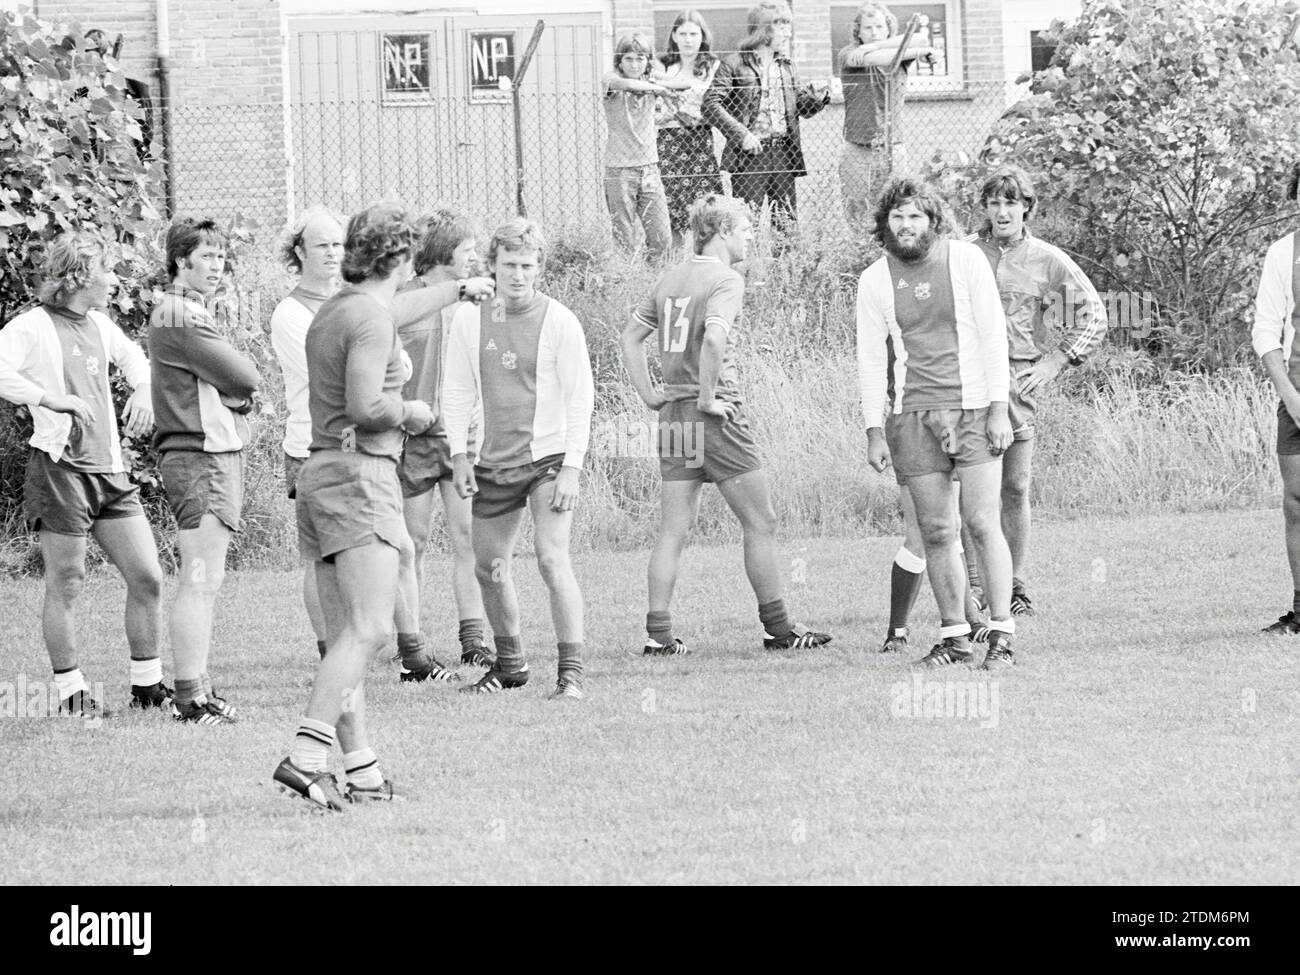 Training Ajax with new player Ton Wickel at Zandvoort Meeuwen., Training, Football Ajax, 21-07-1975, Whizgle News from the Past, Tailored for the Future. Explore historical narratives, Dutch The Netherlands agency image with a modern perspective, bridging the gap between yesterday's events and tomorrow's insights. A timeless journey shaping the stories that shape our future Stock Photo